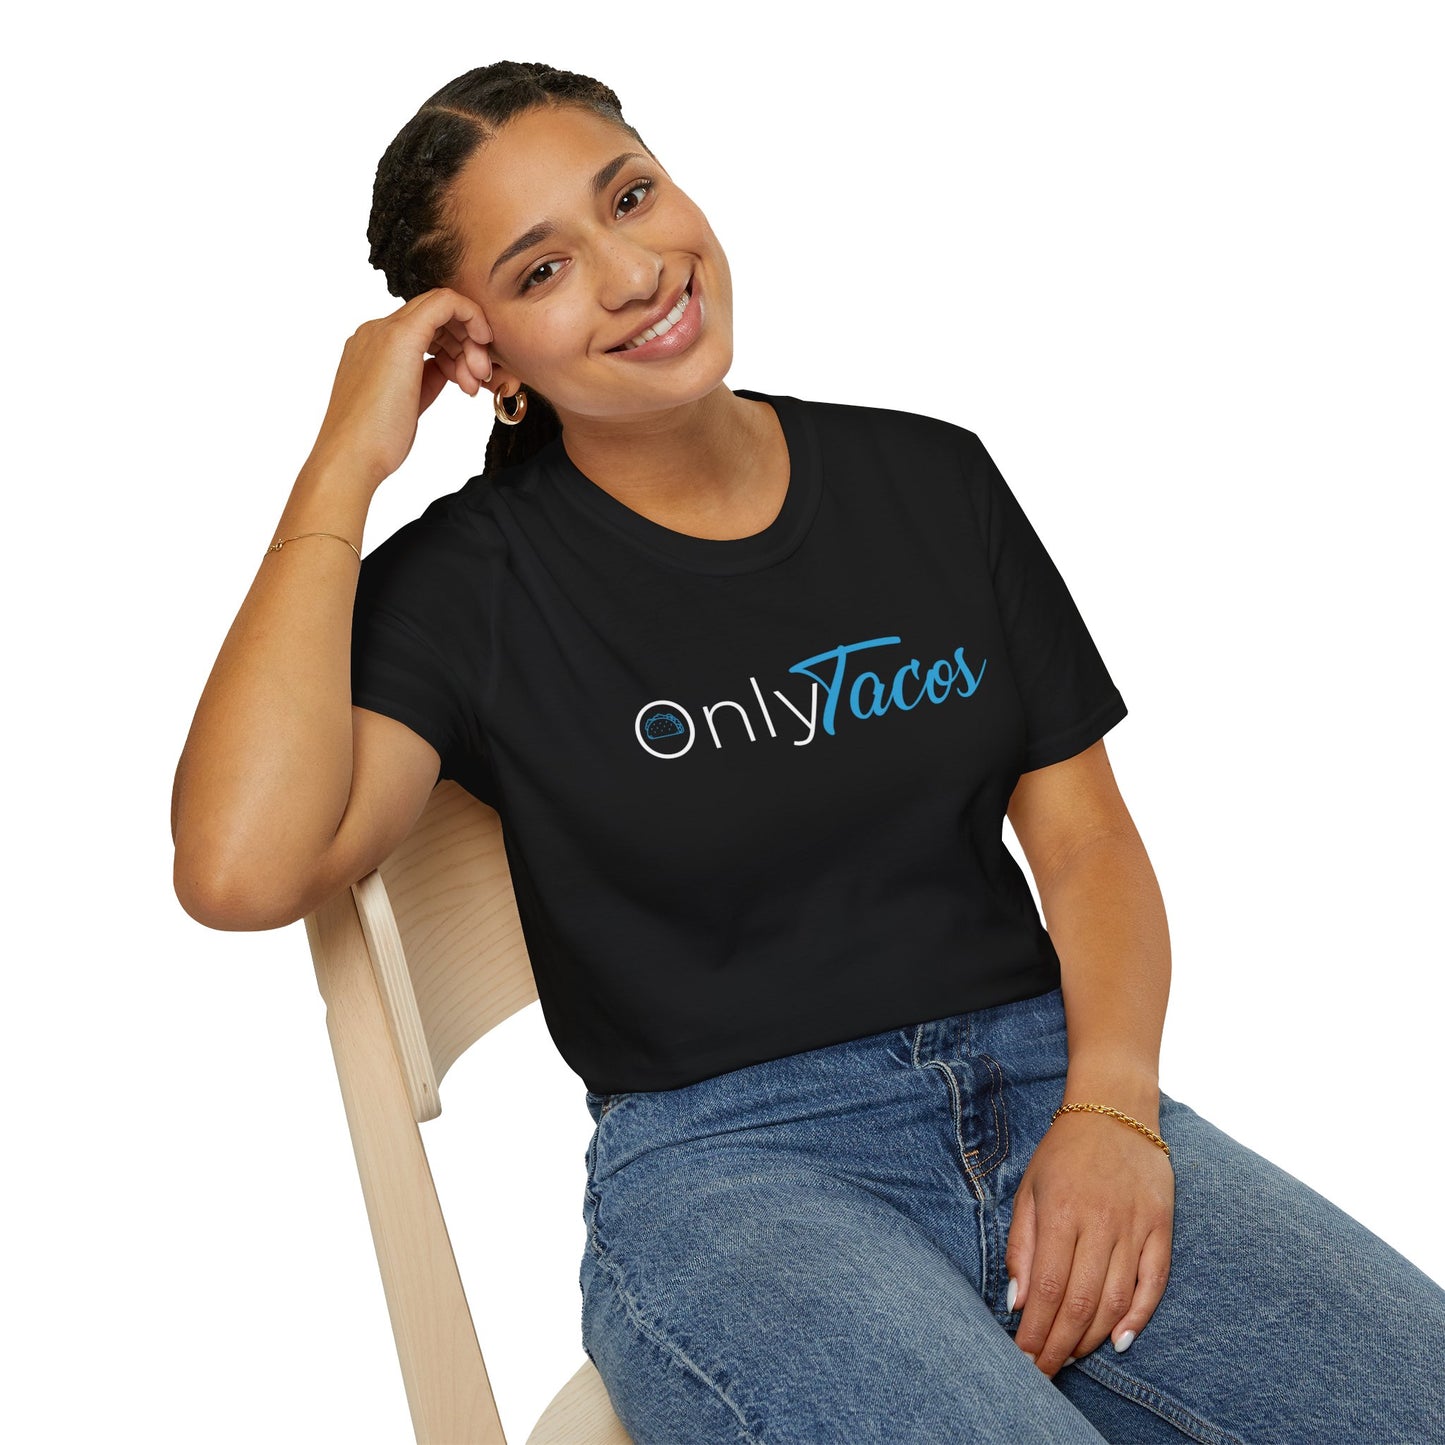 Only Tacos T-Shirt